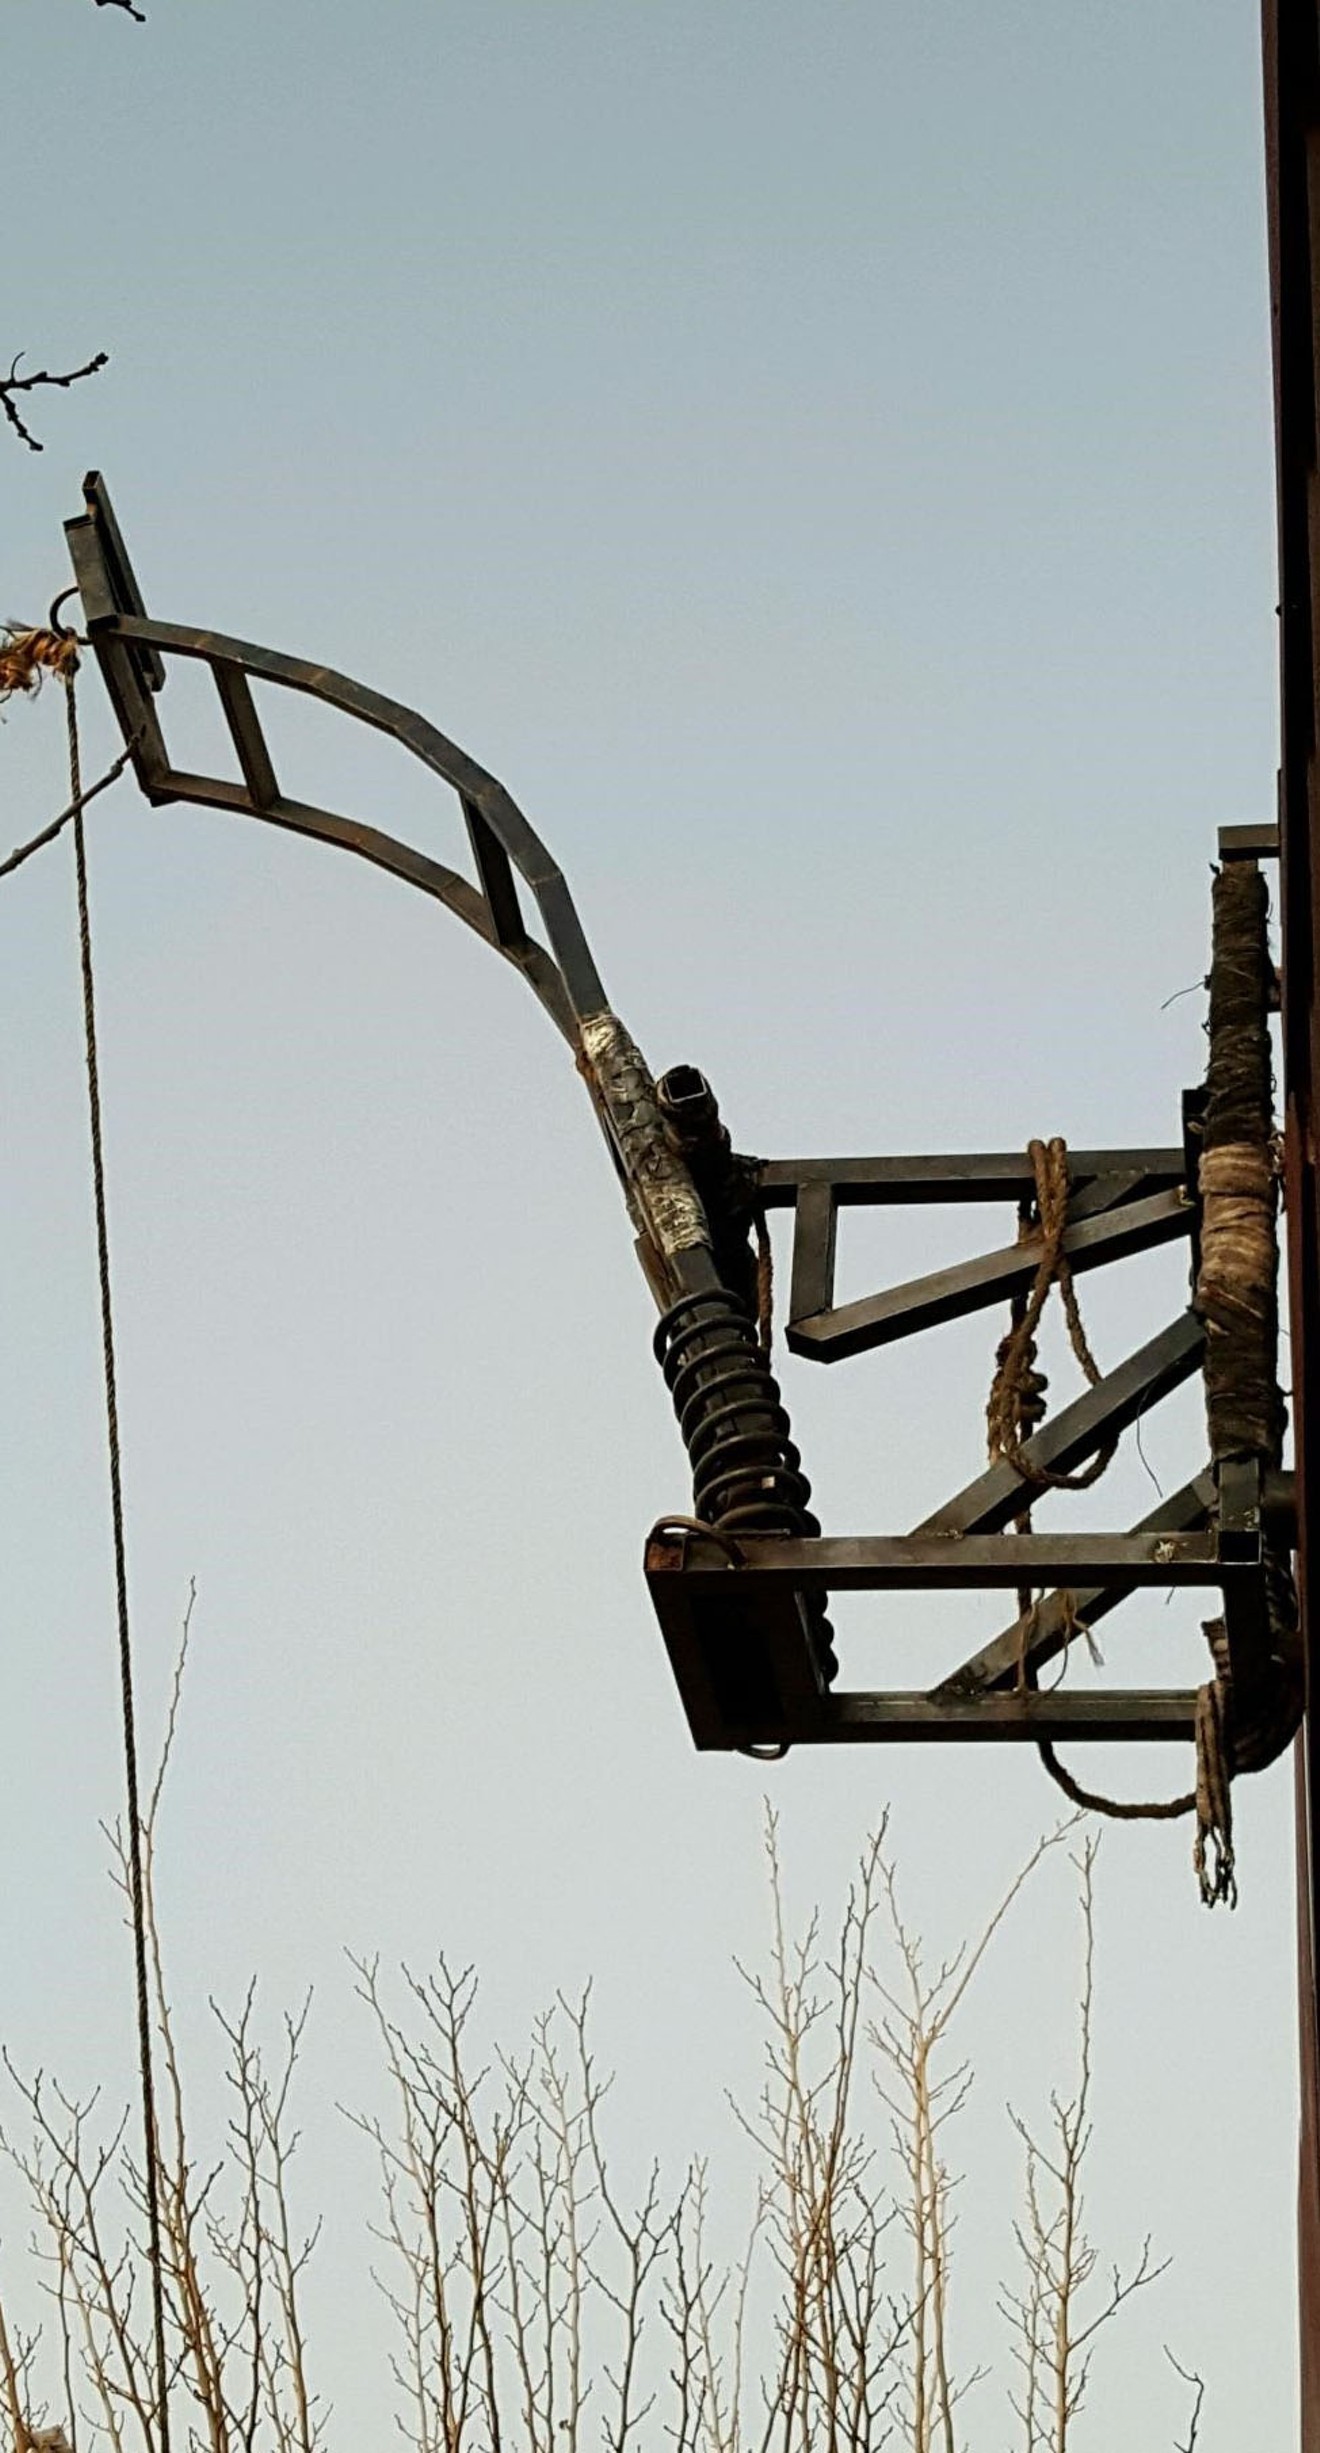 An improvised catapult attached to the south side of the border fence near Douglas was found and dismantled by border agents on Friday.